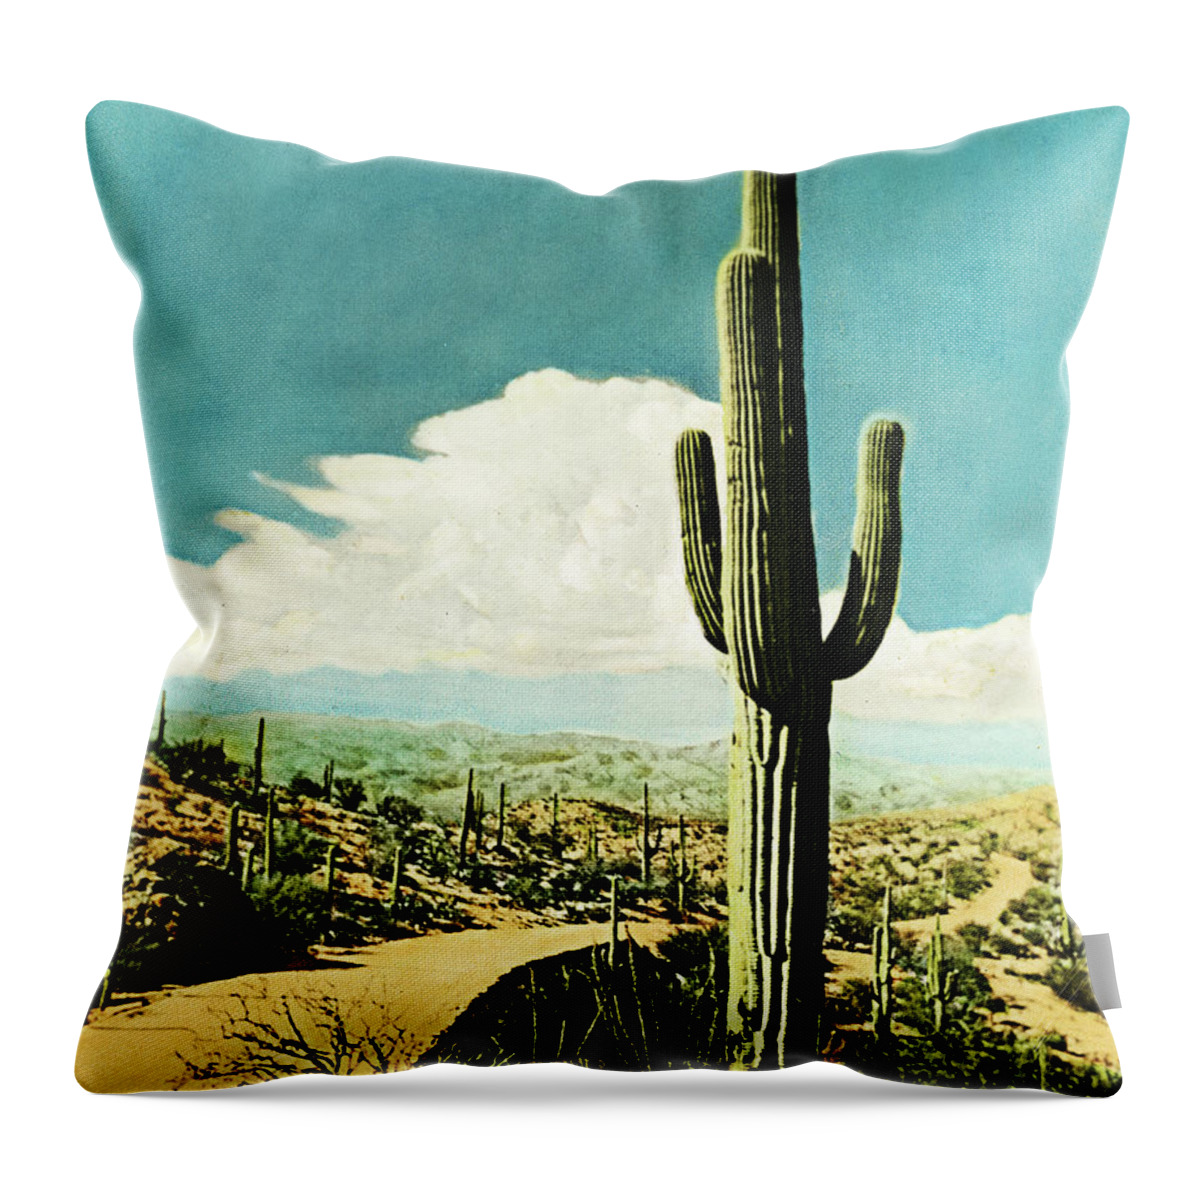 Vintage Throw Pillow featuring the photograph Saguaro Cactus by Marilyn Hunt